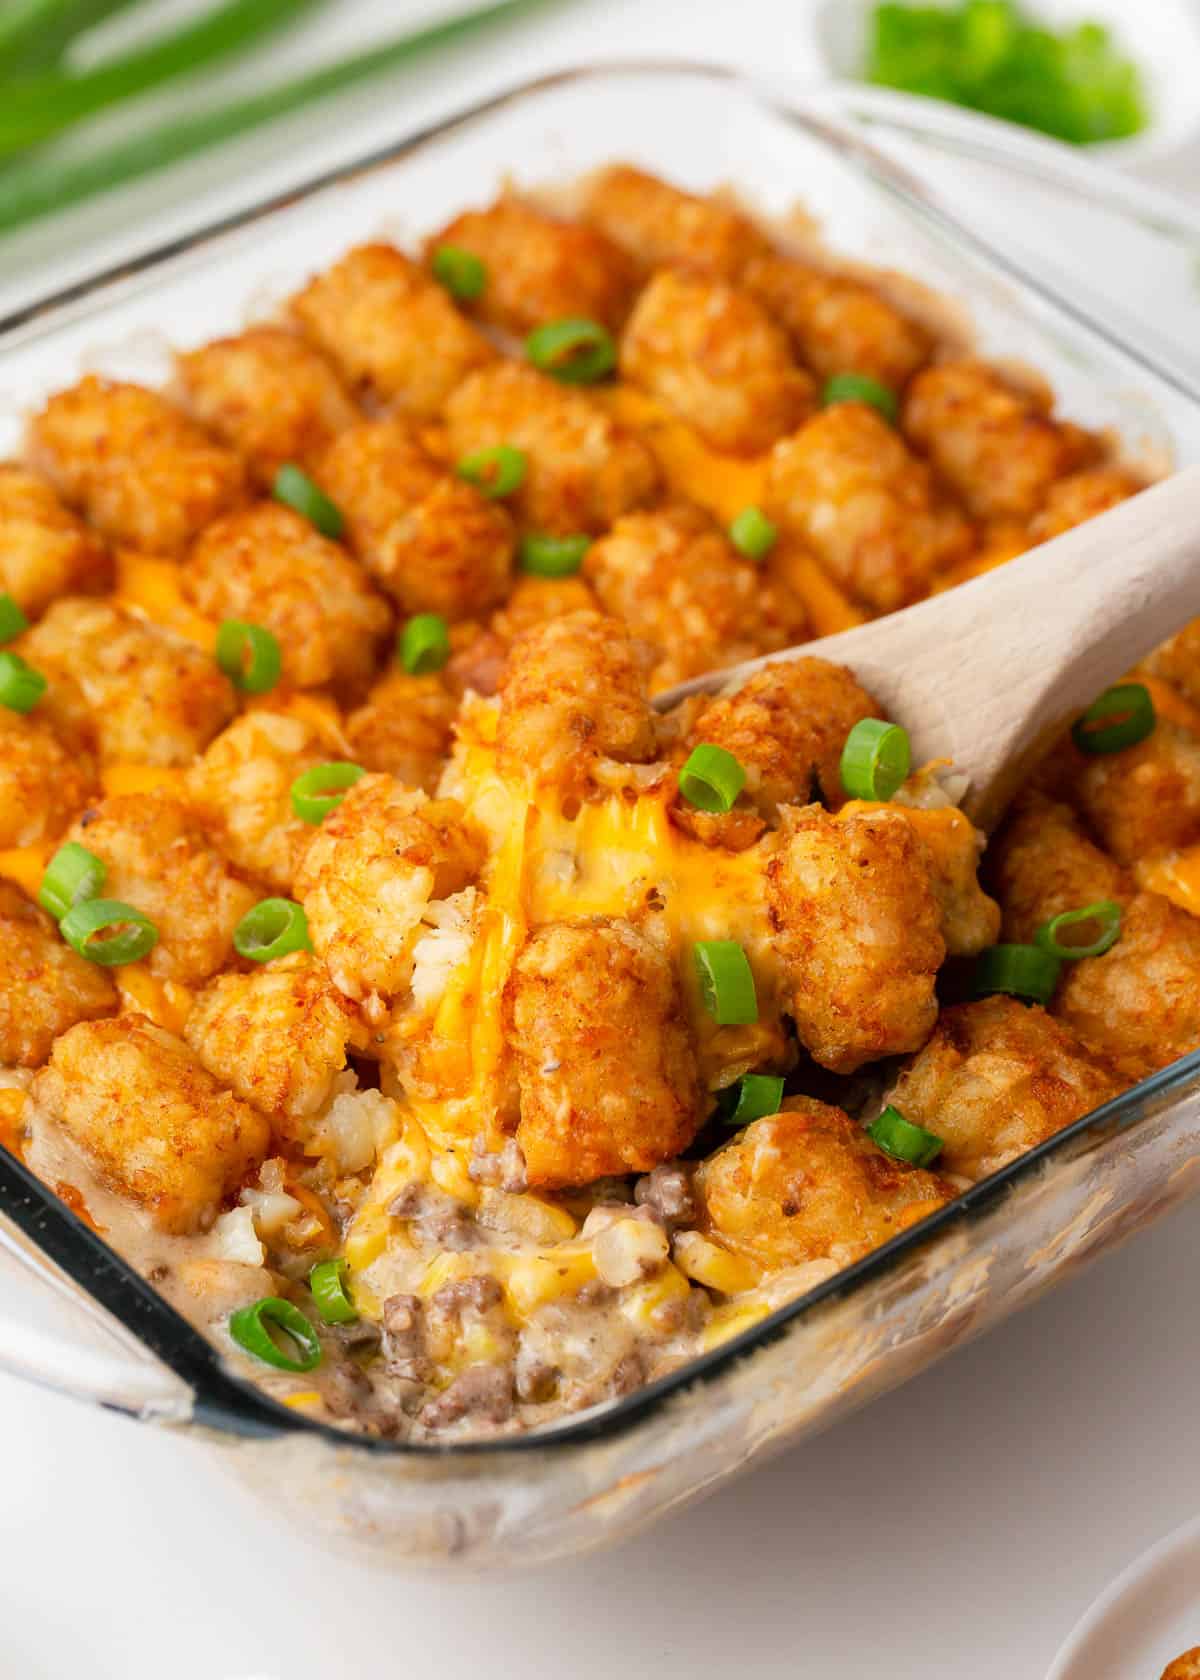 Tater tot casserole in a glass dish with a spoon.